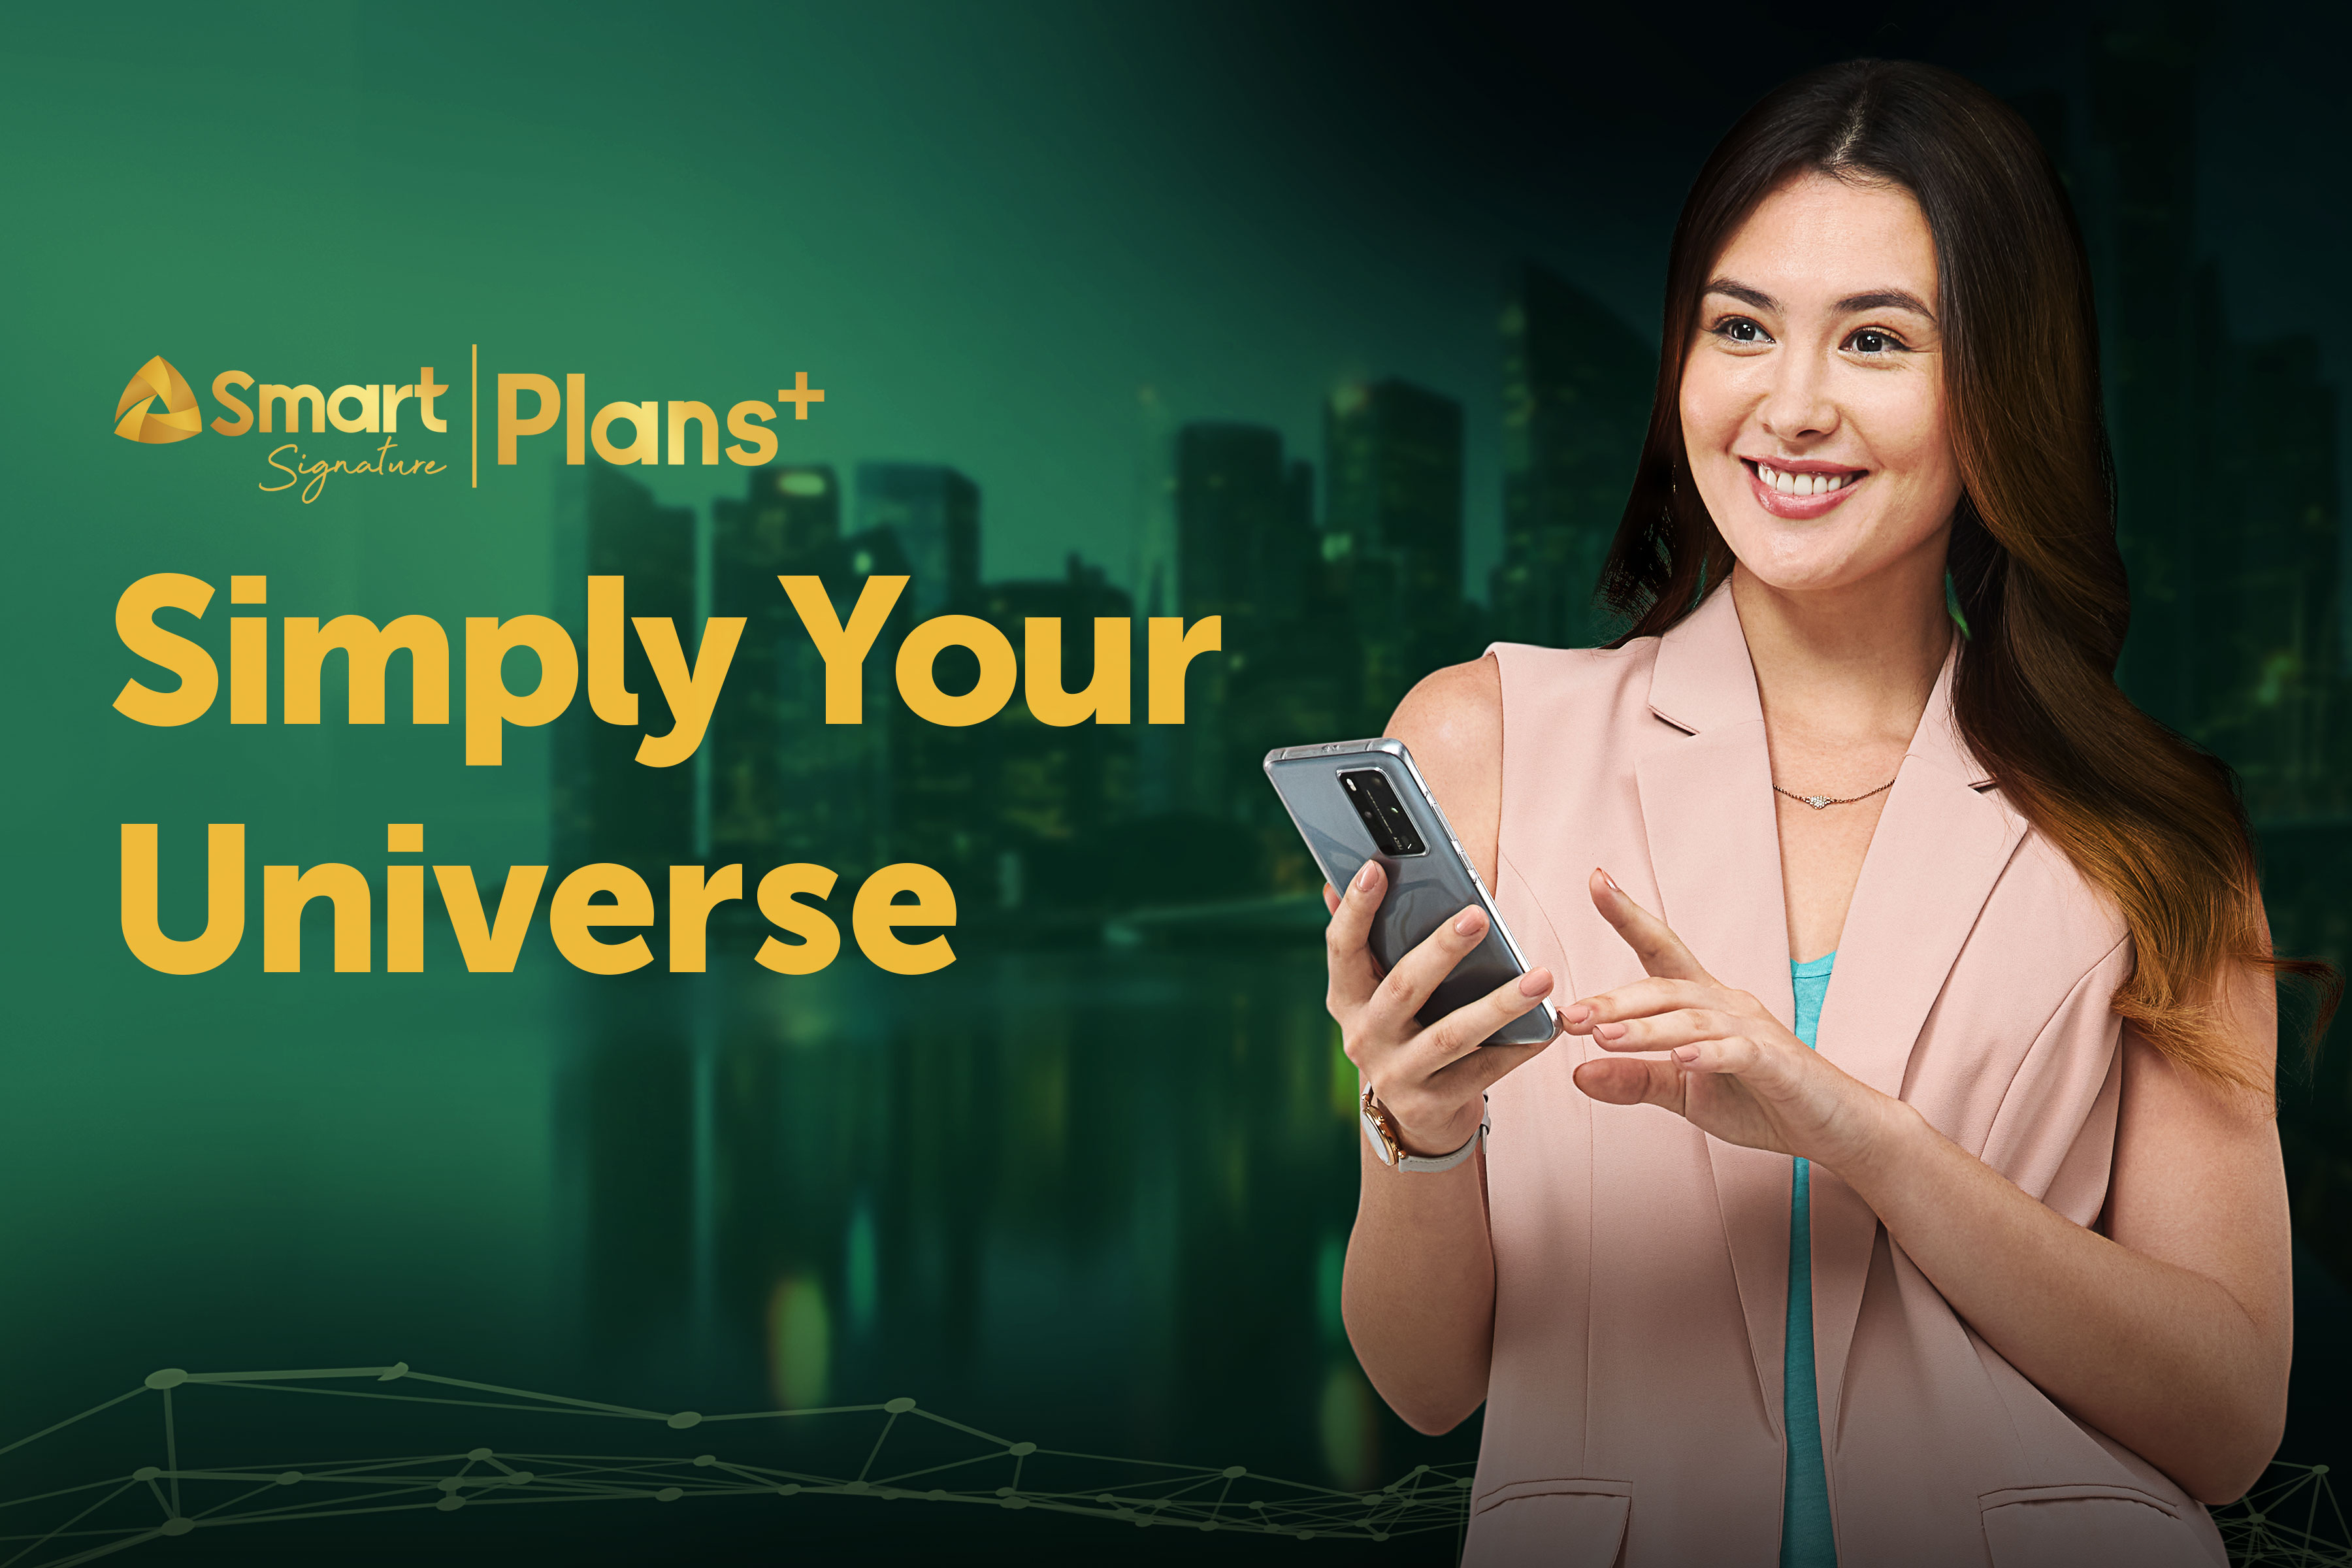 Smart Boosts Signature Plans+ with 12 Months of UNLI 5G